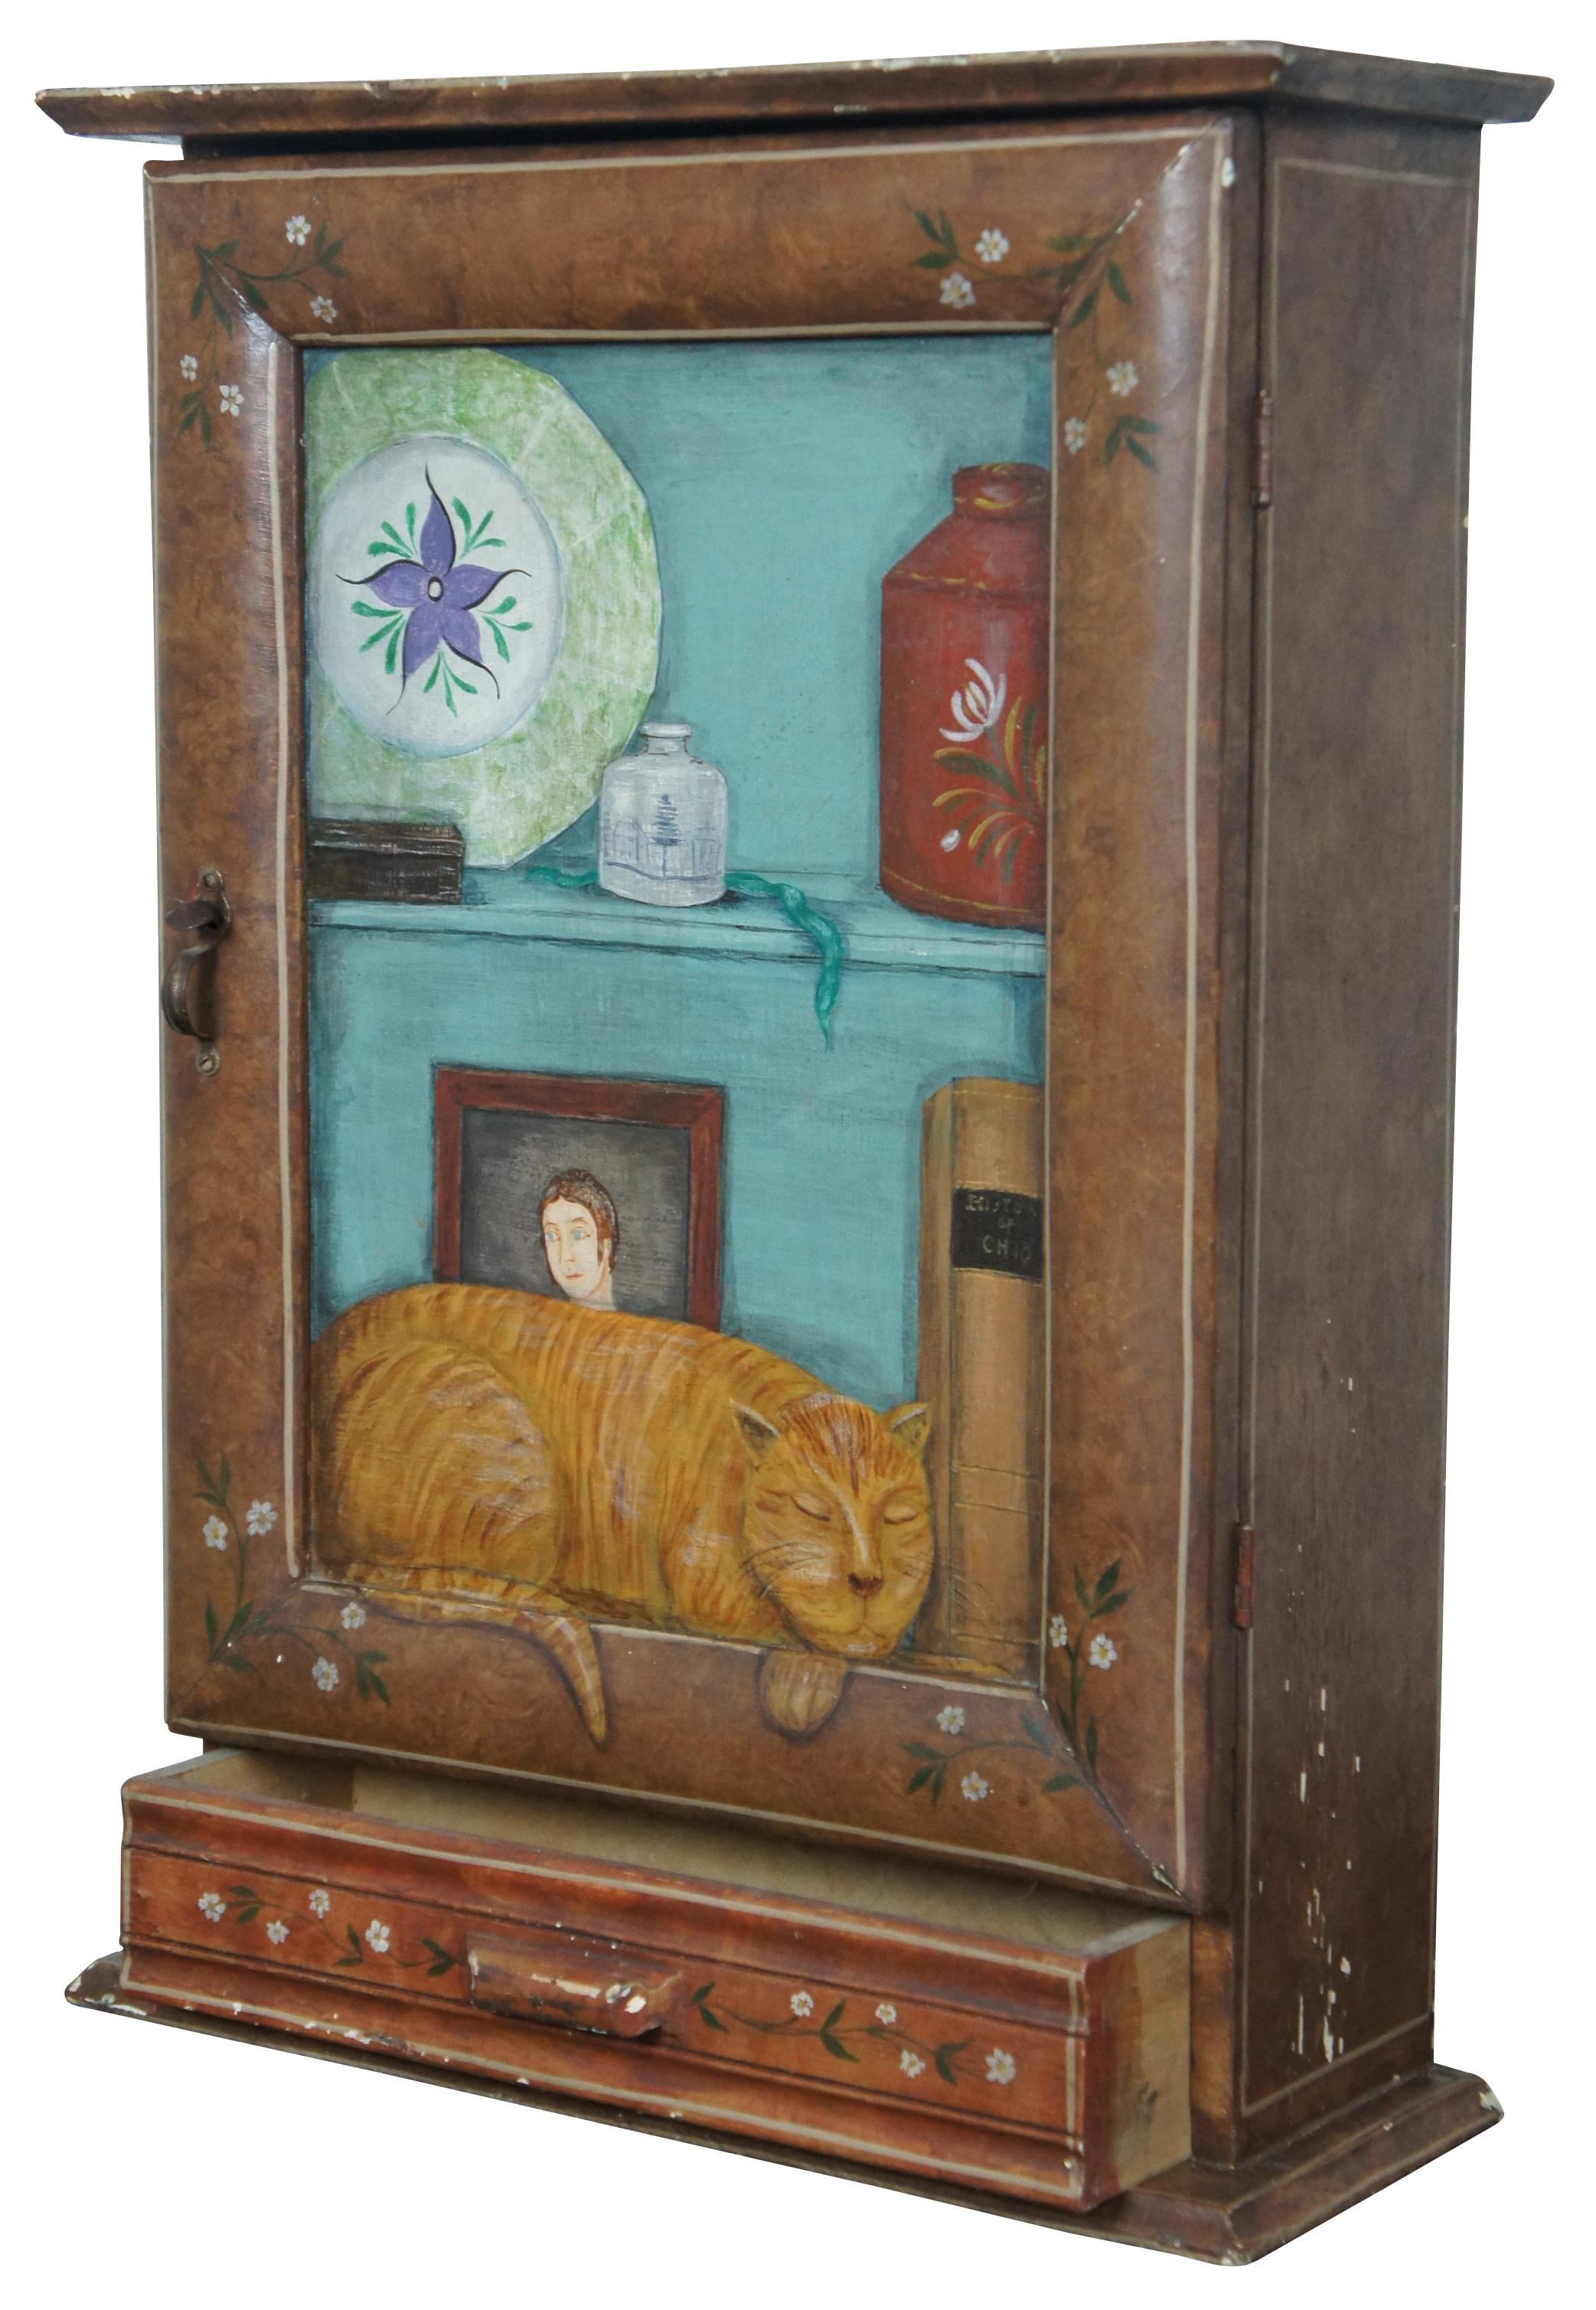 Antique wooden wall hanging medicine cabinet painted with flower accents and a central panel painted to look like the cabinet is full of objects and a sleeping cat. Interior is painted blue with a pineapple on the back of the door.
  